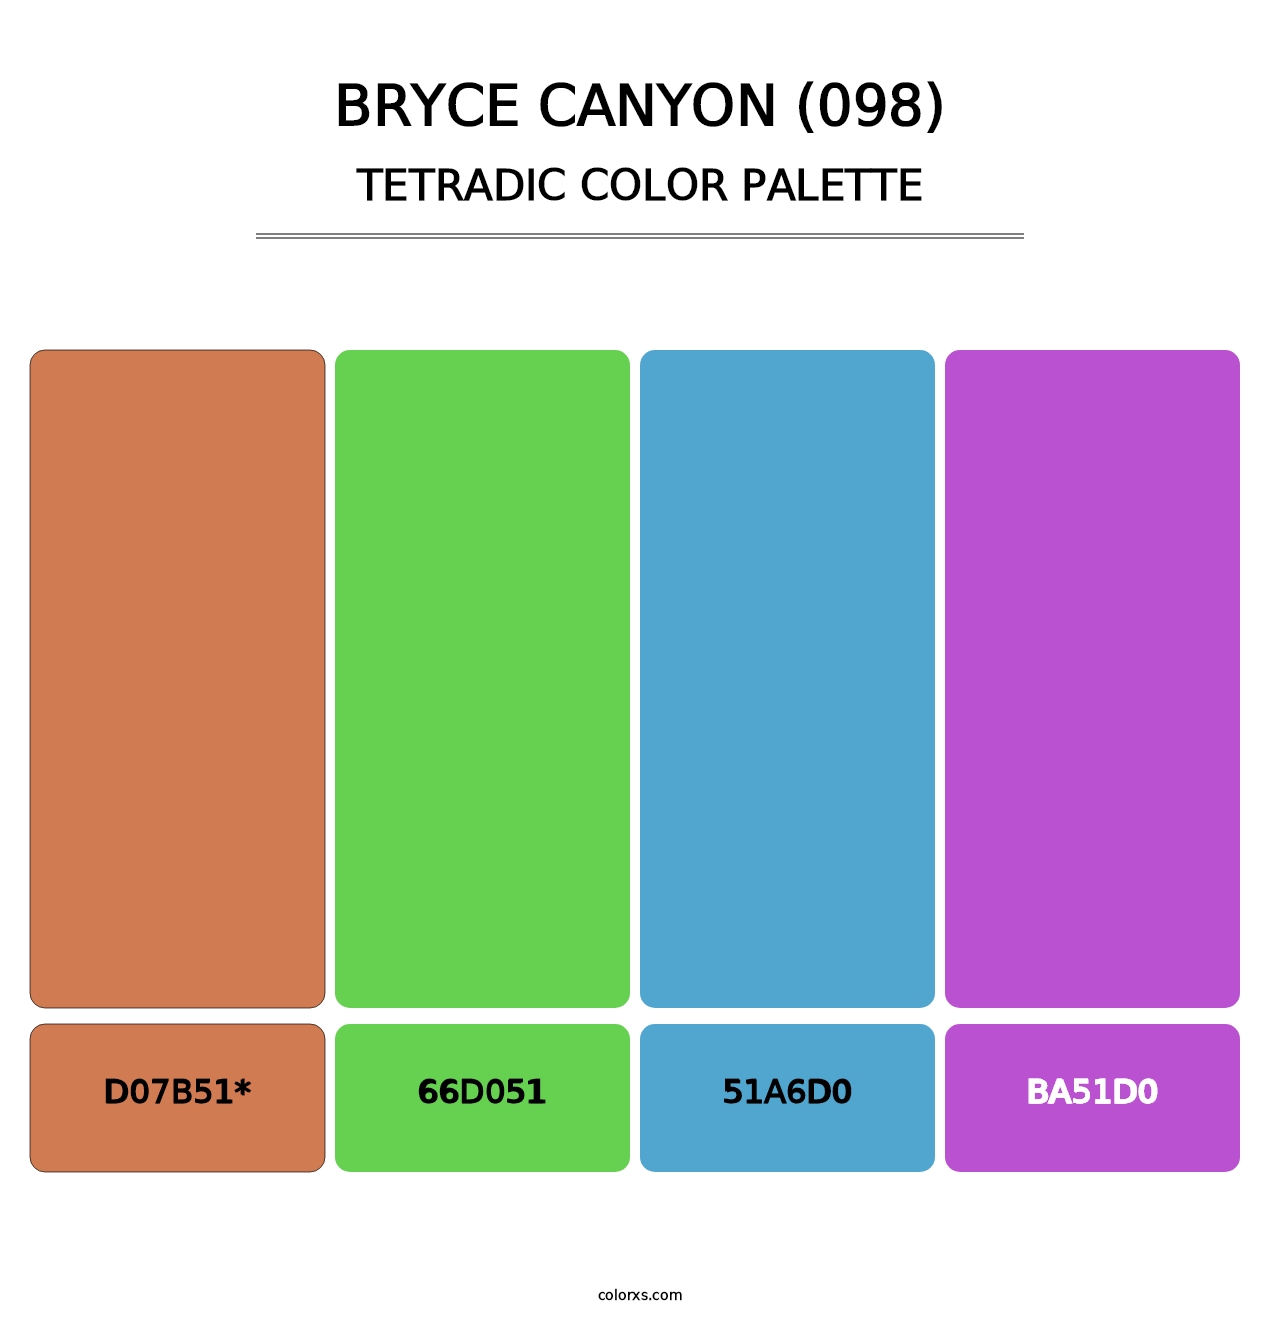 Bryce Canyon (098) - Tetradic Color Palette